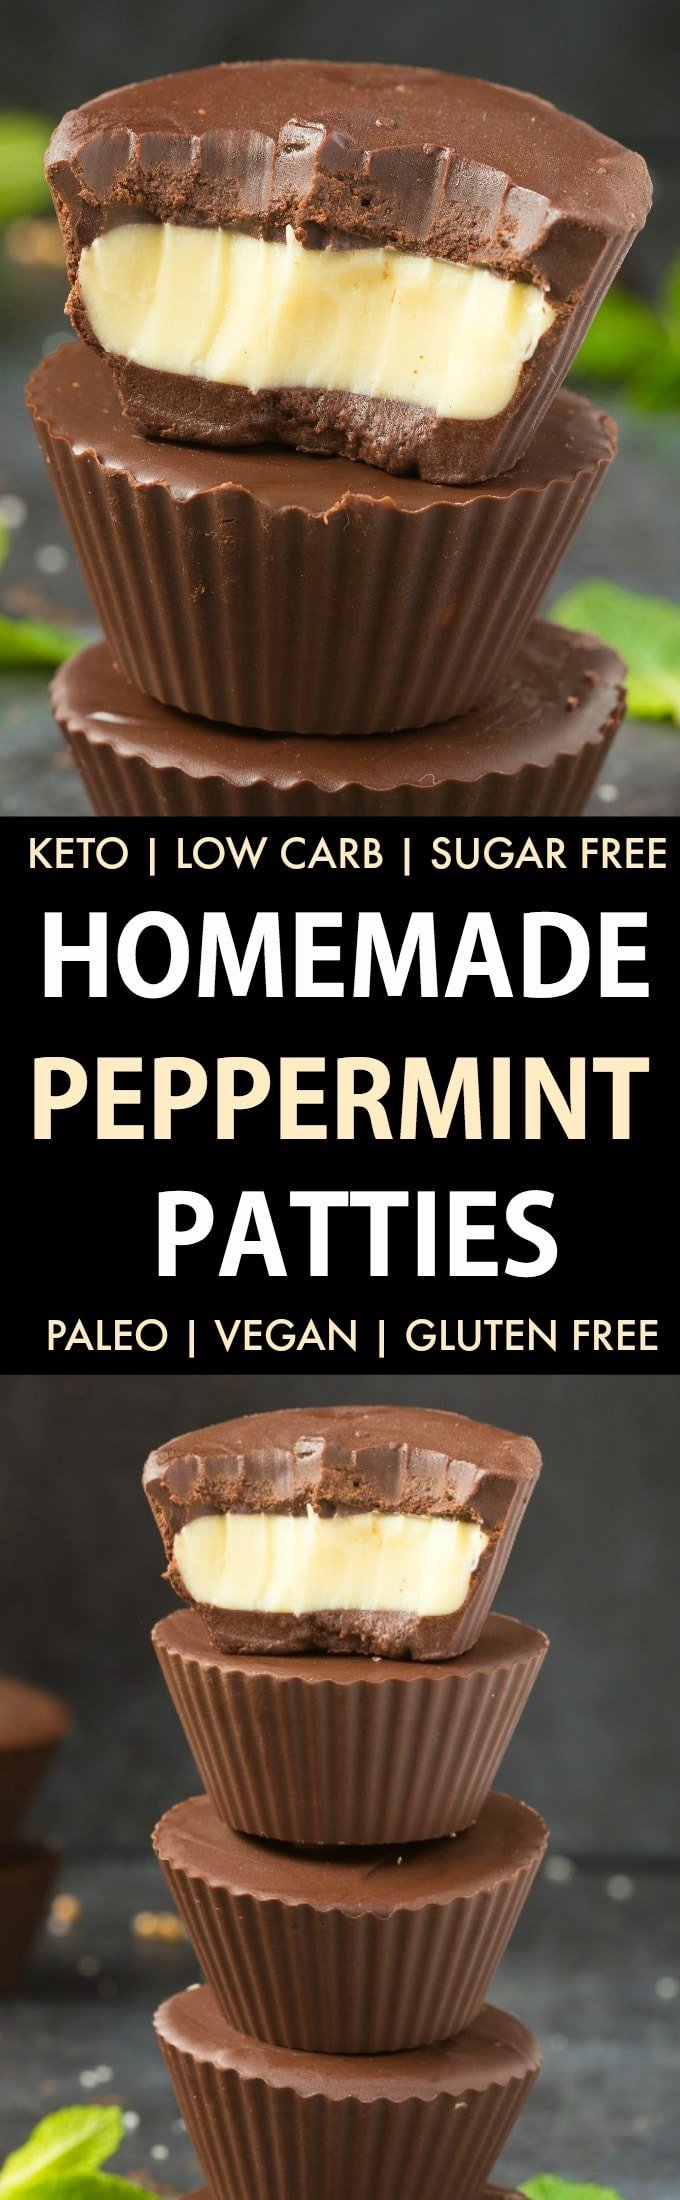 Healthy Homemade Peppermint Patty Recipe made with just 3-ingredients and NO sugar! These easy keto and vegan peppermint patties are the perfect mint chocolate no bake dessert to enjoy anytime! #fatbomb #ketodessert #vegandessert #ketodiet #ketogenic #sugarfree